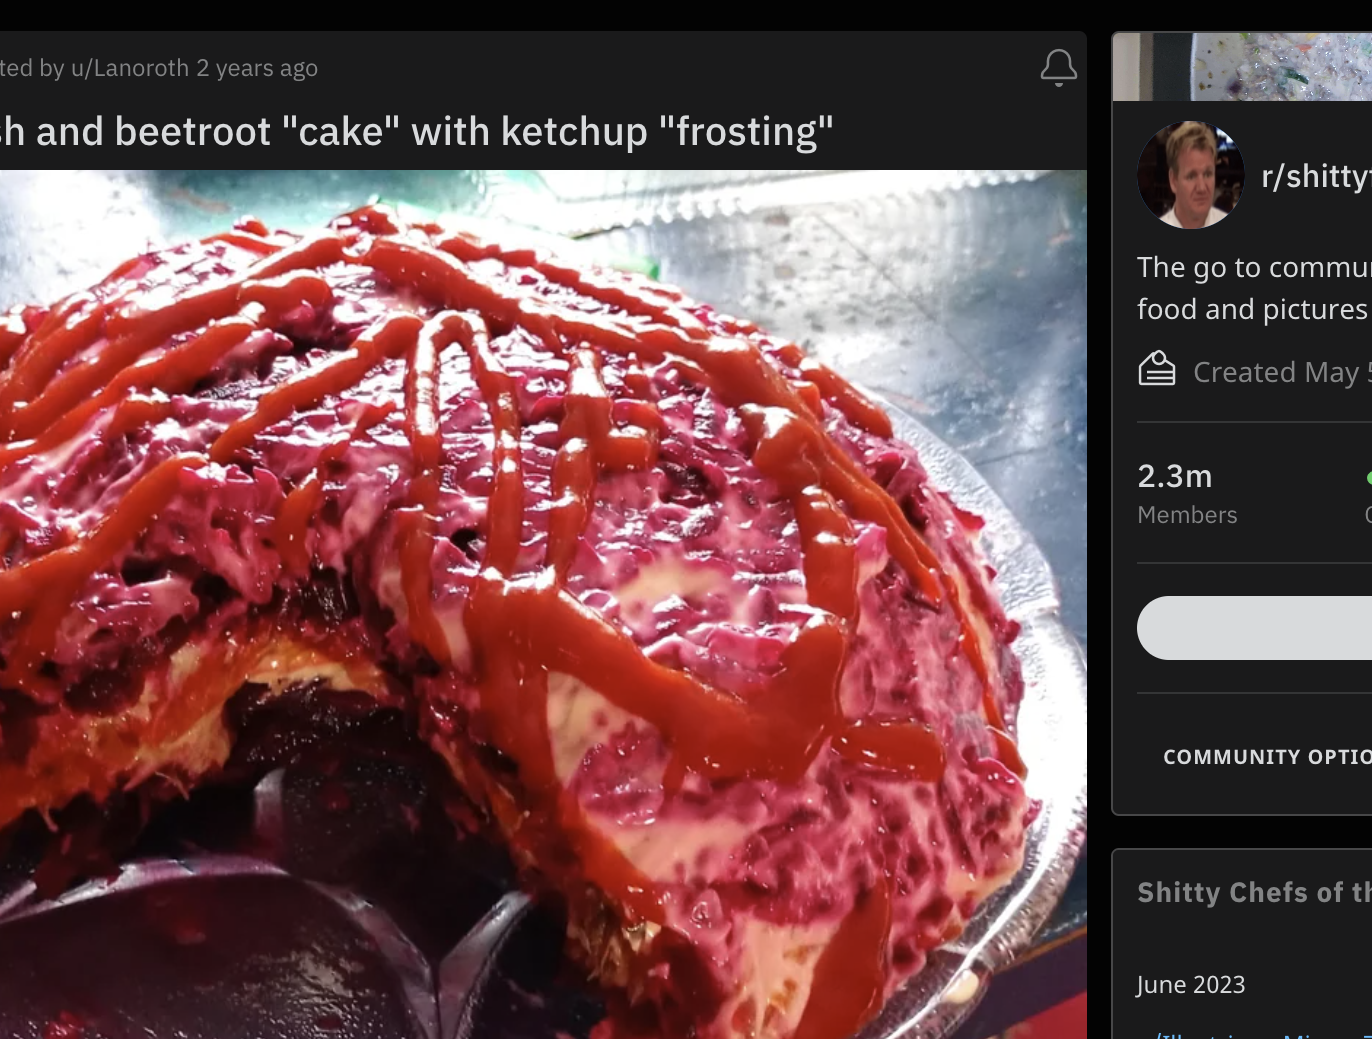 A beet cake is made with &quot;ketchup&quot; icing